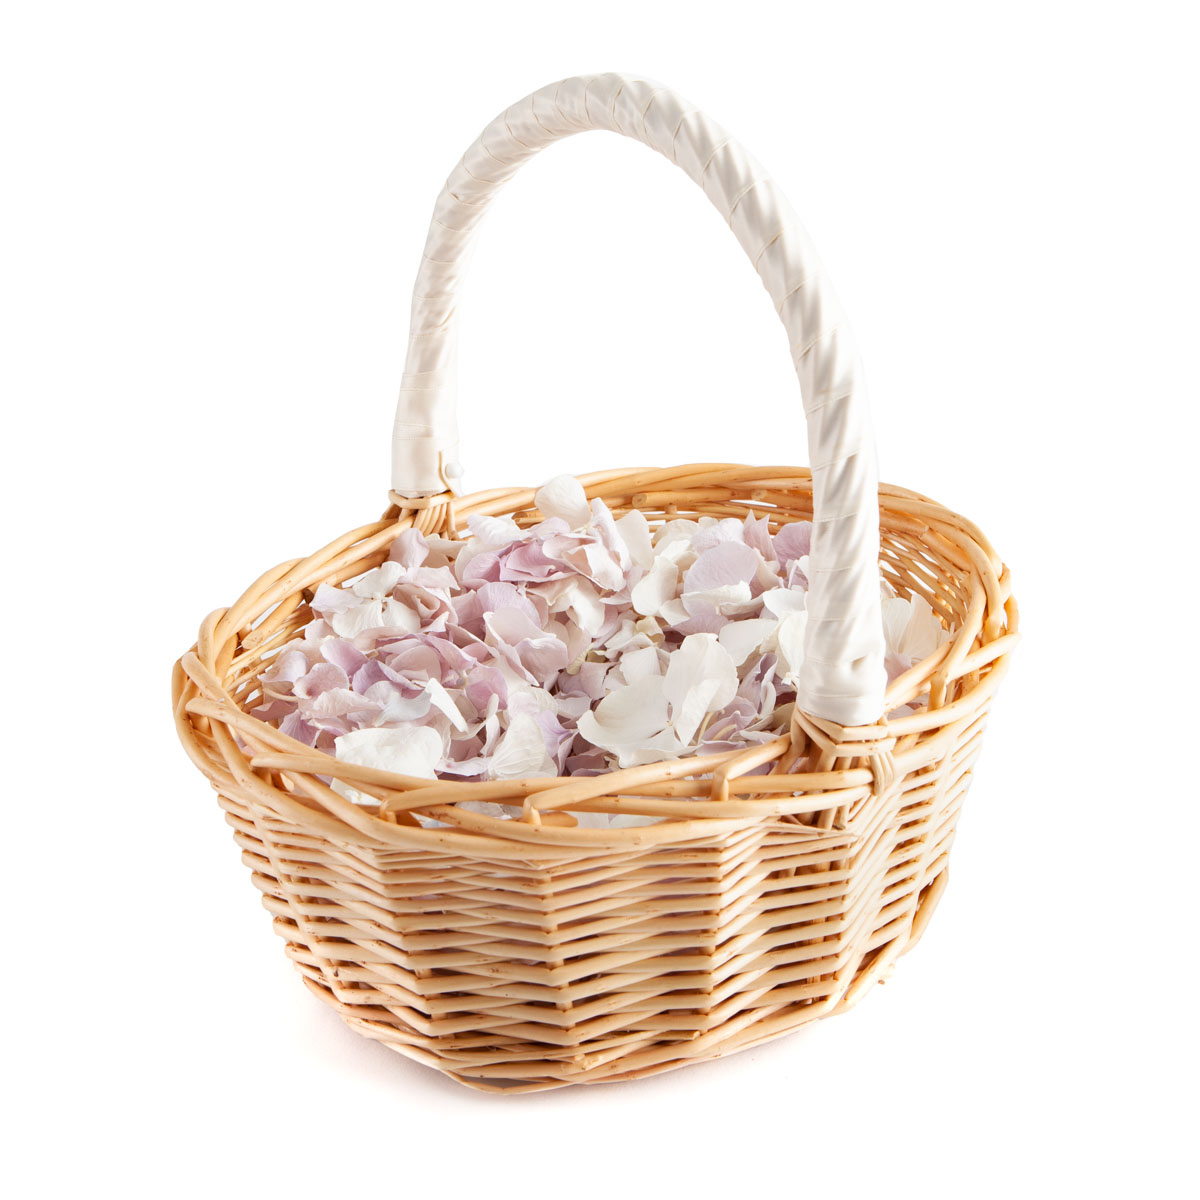 Lilac and White Hydrangea Petals in a flower girl basket